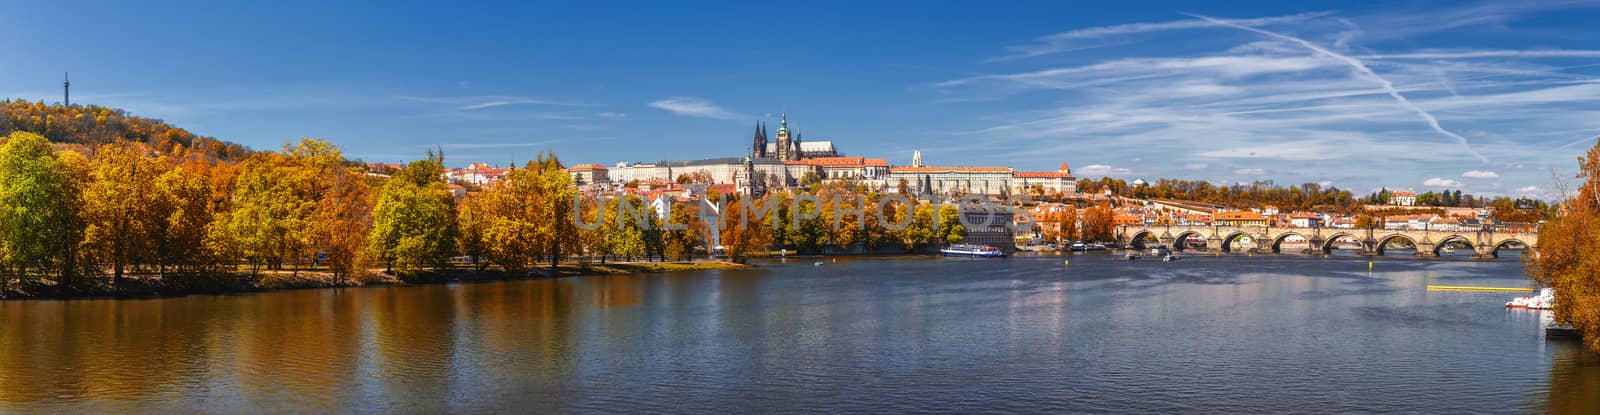 Prague Castle and Old City day view with blue sky, travel vivid autumn european background. Czech Republic